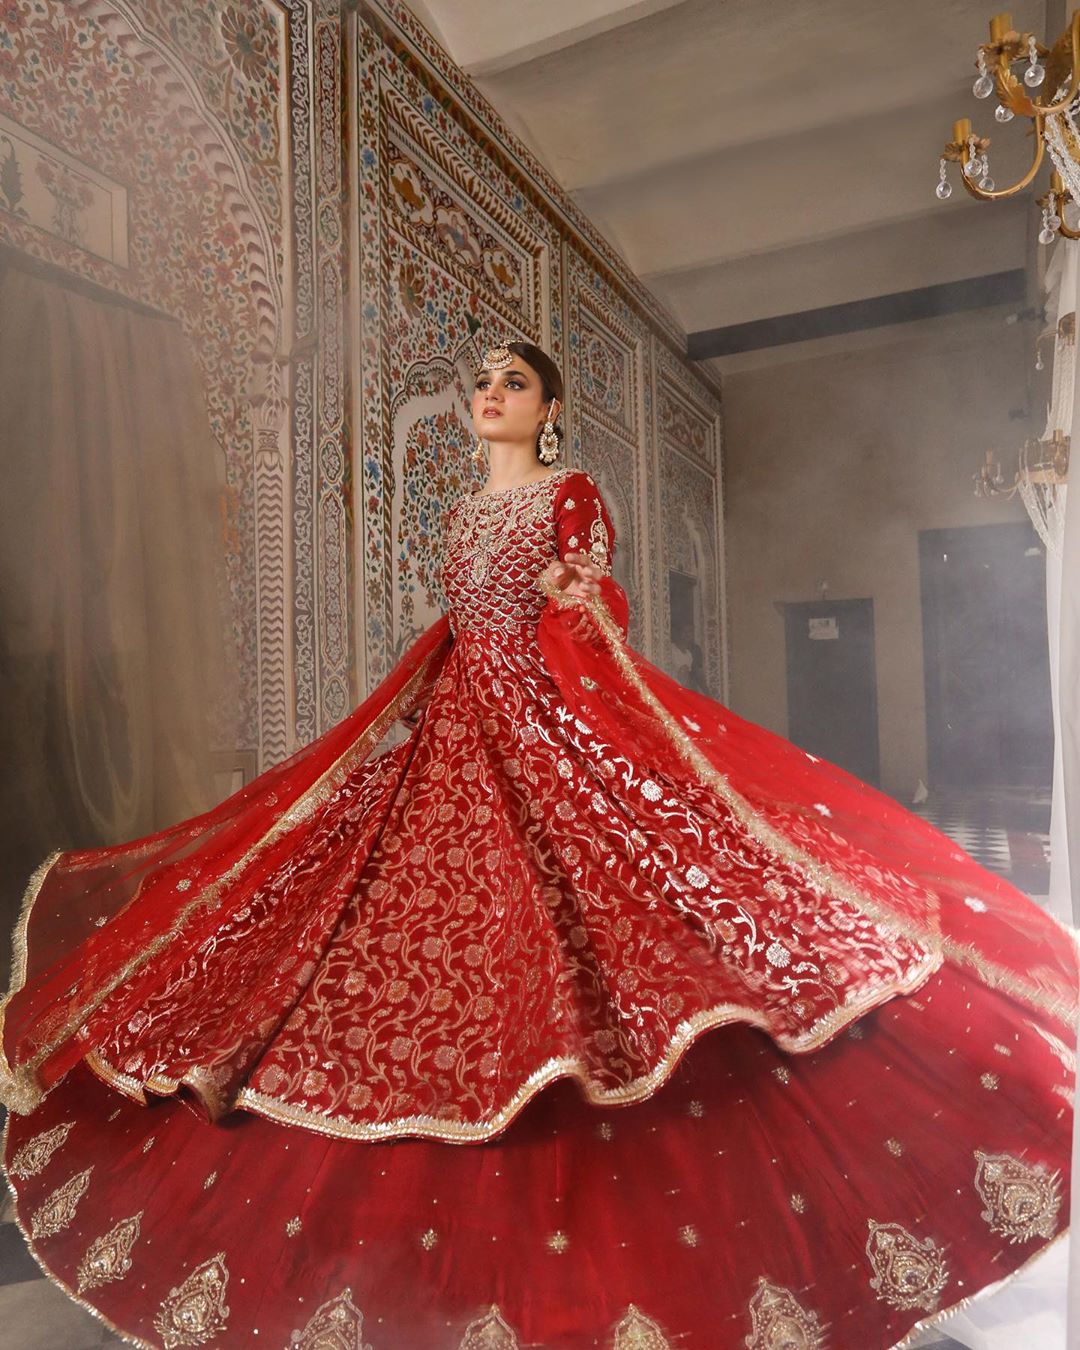 Hira Mani is Looking Beautiful and Gorgeous in Her Latest Bridal Shoot